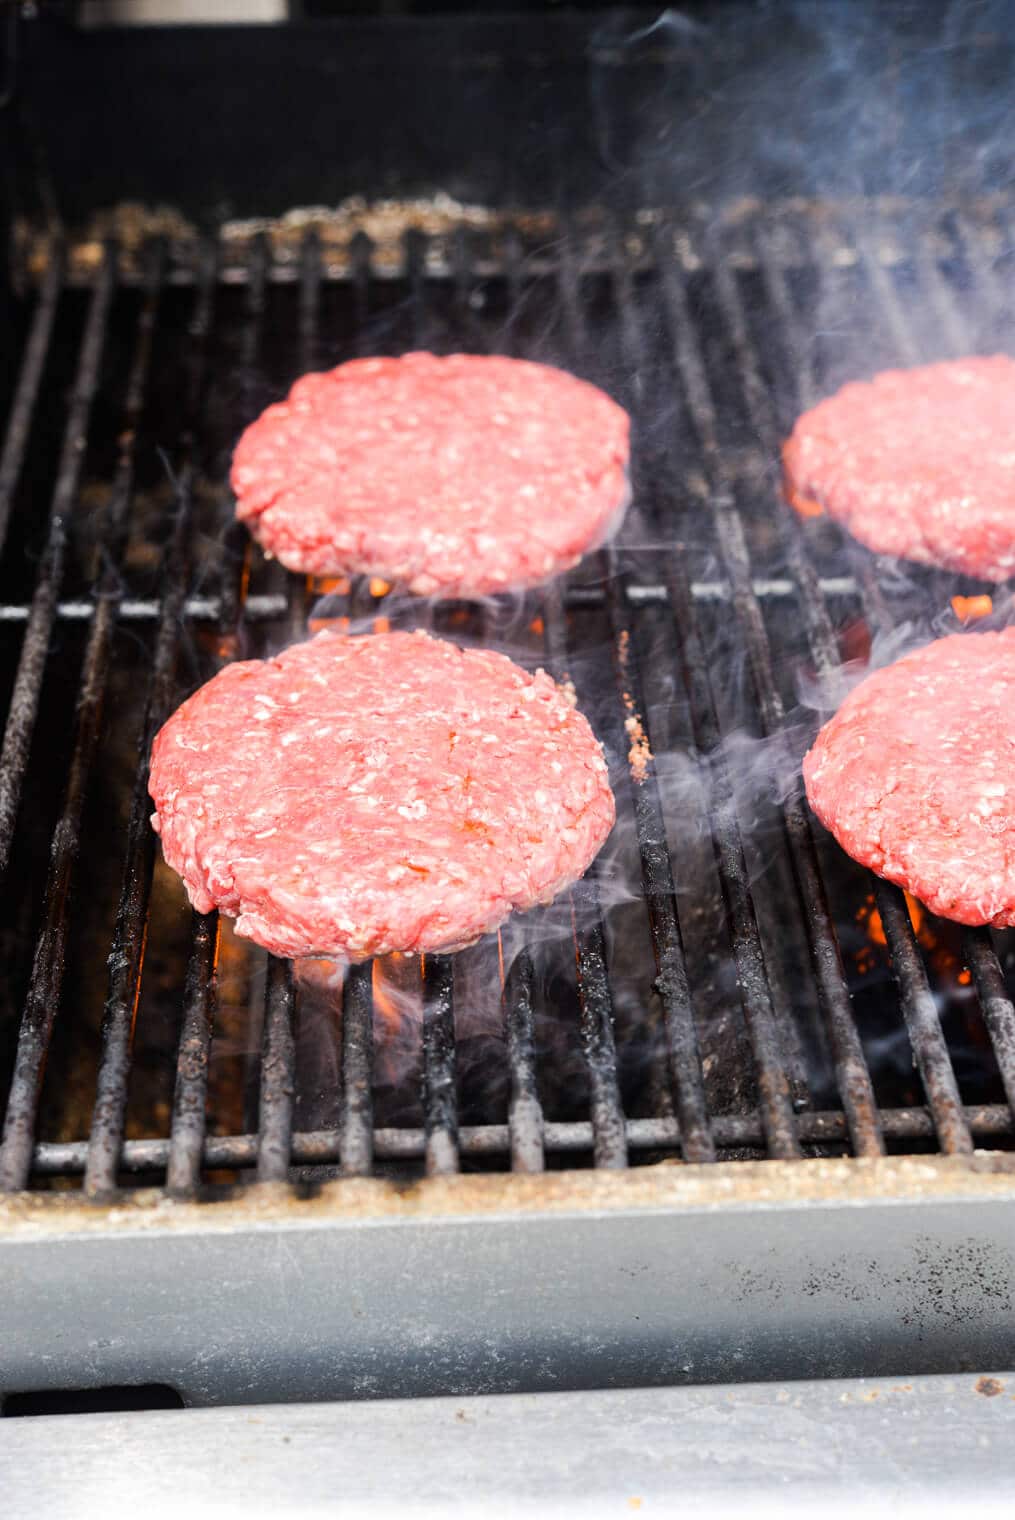 4 ground beef patties on the grill grates of a gas grill